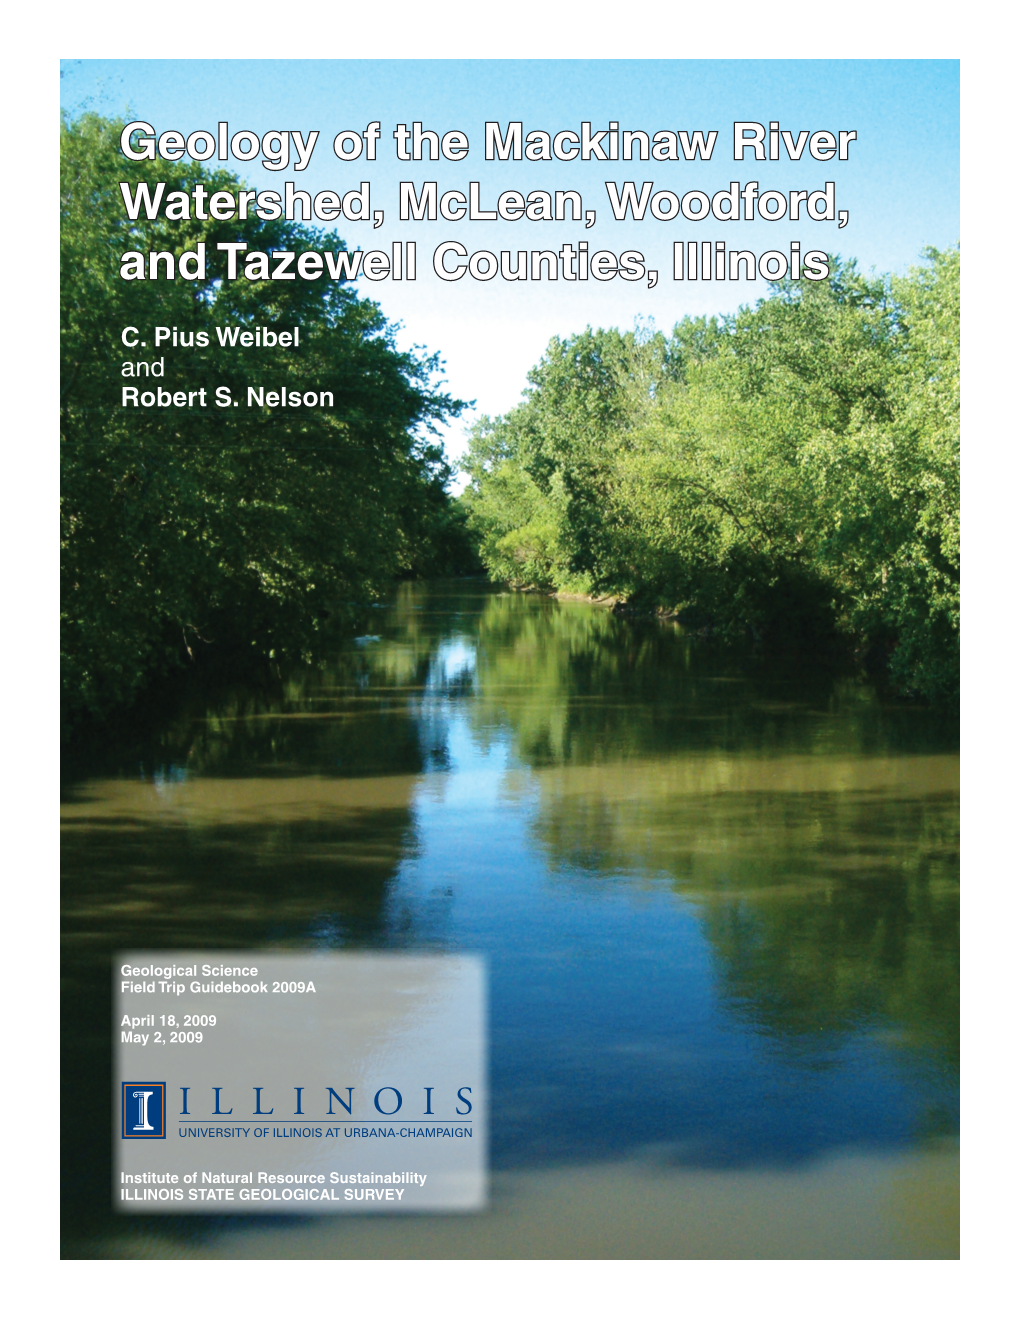 Geology of the Mackinaw River Watershed, Mclean, Woodford, and Tazewell Counties, Illinois